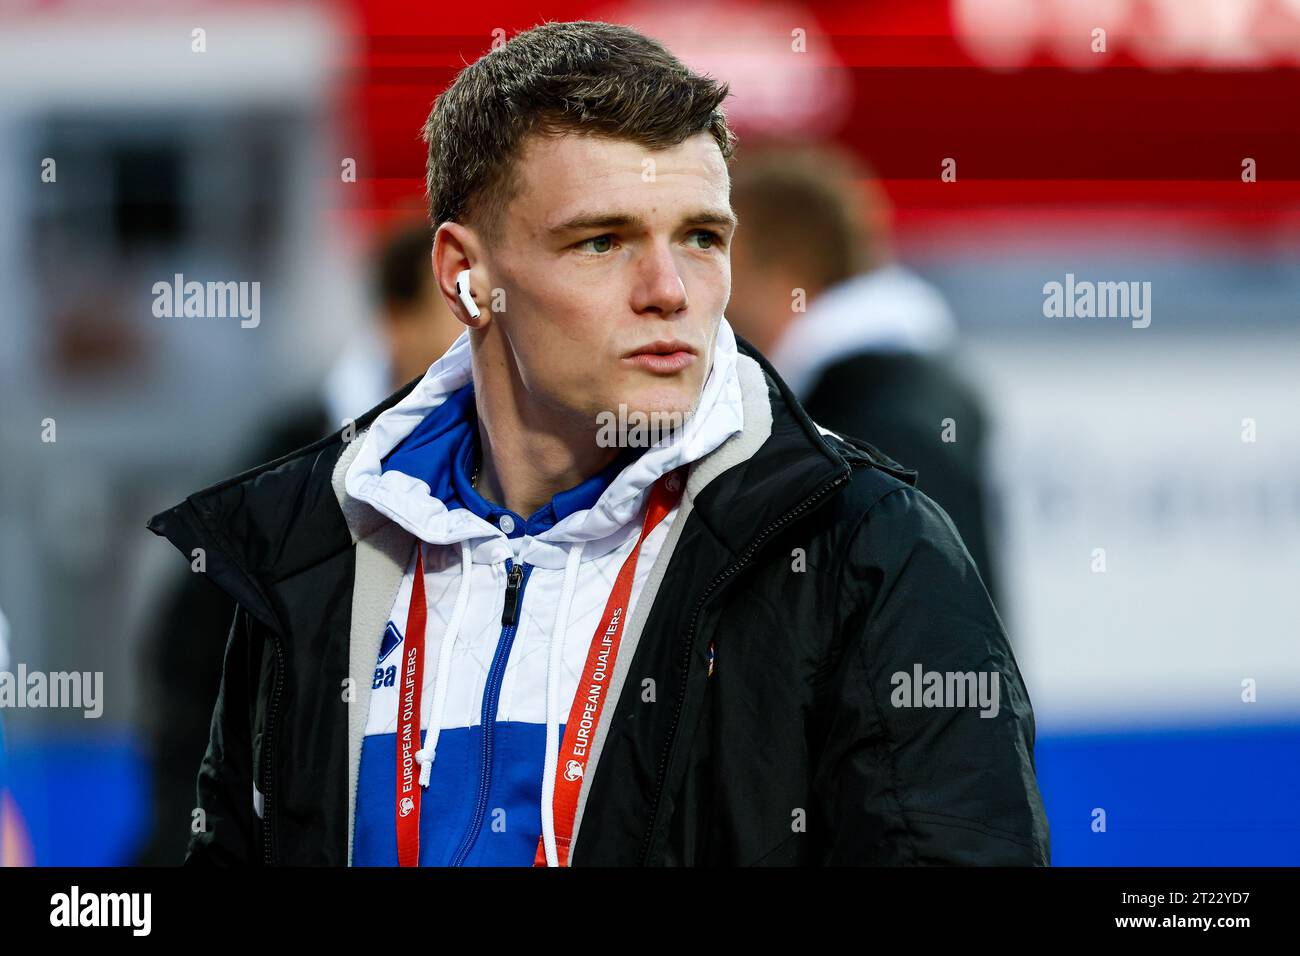 Iceland. 16th Oct, 2023. Reykjavik, Iceland, October 16th 2023: Players of Liechtenstein at arrival prior to the UEFA European Qualifiers football match between Iceland and Liechtenstein at Laugardalsvollur in Reykjavik, Iceland. (Gunnar Örn Árnason/SPP) Credit: SPP Sport Press Photo. /Alamy Live News Stock Photo